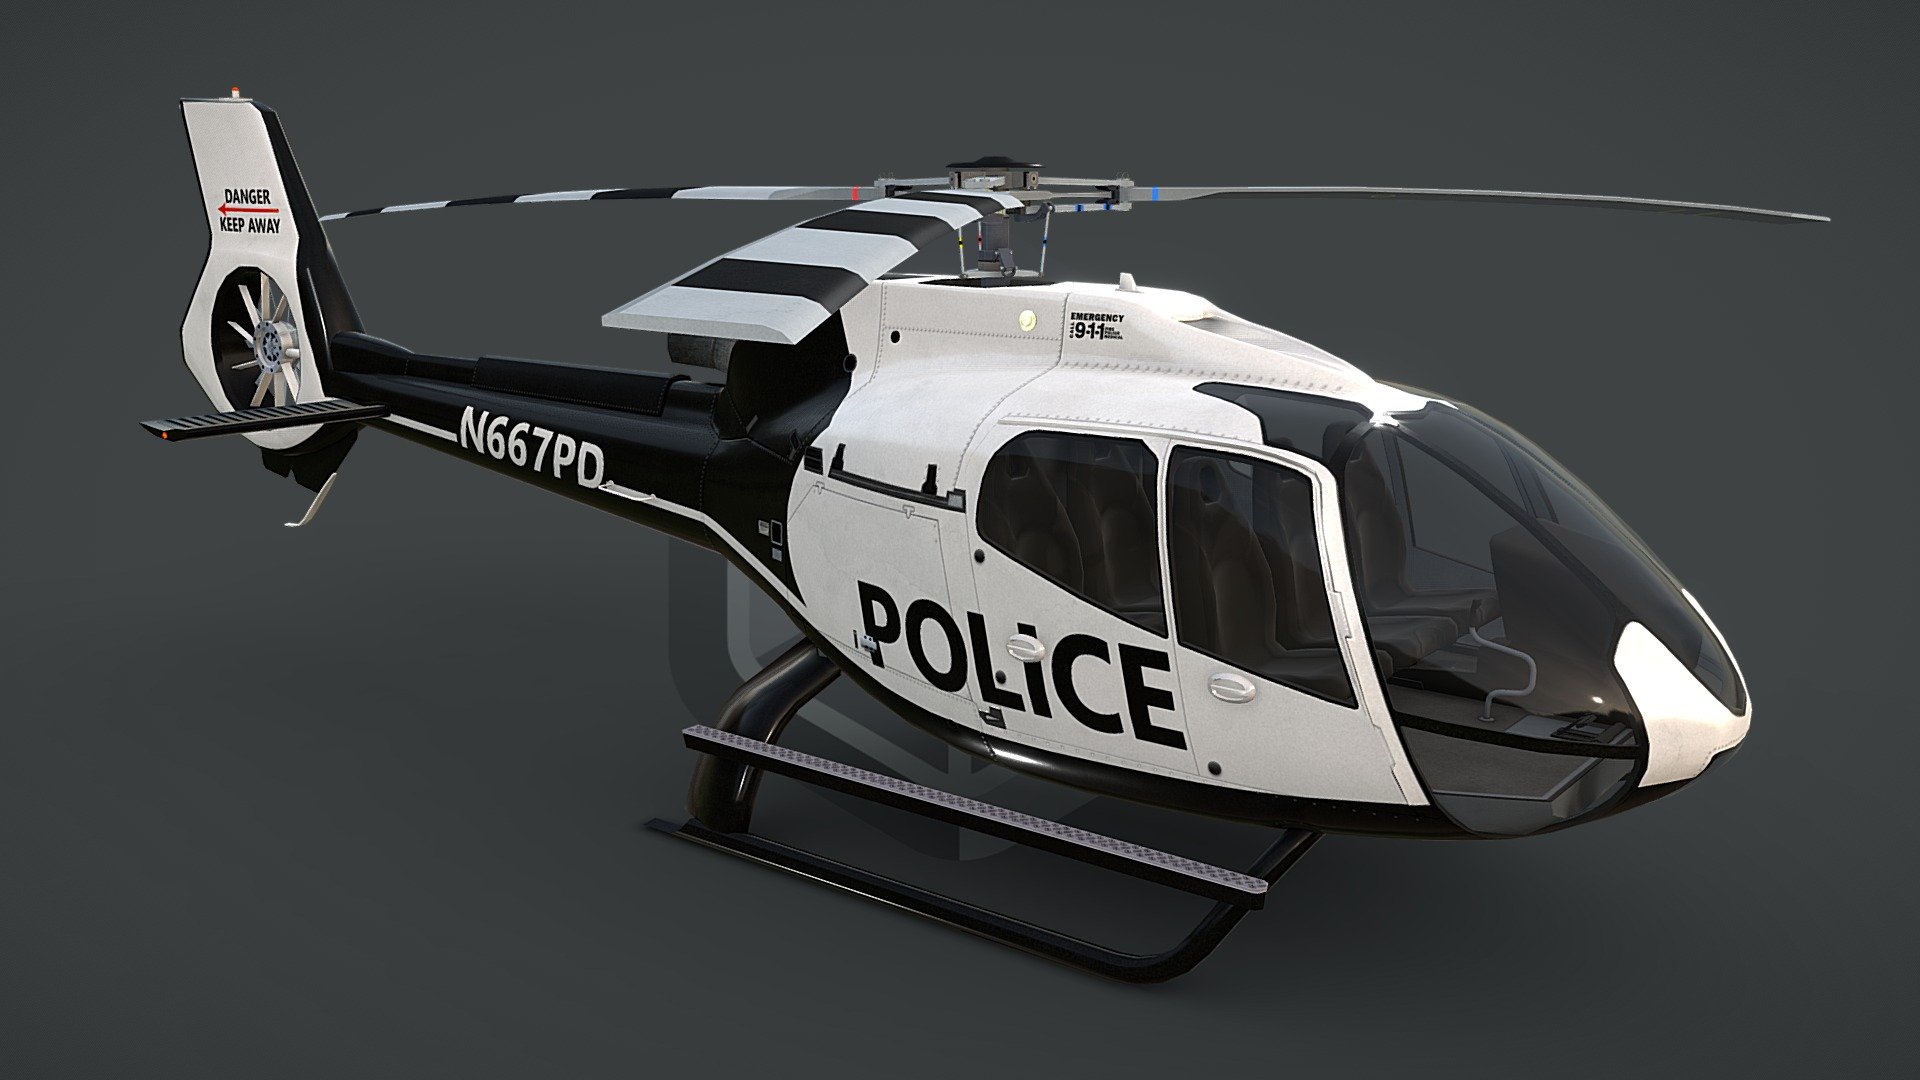 game ready, realtime optimized game asset

unique livery and branding

both PBR workflows ready

LOD0 is HQ lowpoly with bended top rotor, all lights objects and interior

LOD0 19710 tris, LOD1 10462 tris, LOD2 7388 tris, LOD3 5990 tris

100% triangulated and 100% unwrapped non-overlapping

5 x uv layouts, body, HQ rotors, LQ rotors, interior, lights

made using blueprints, real world scale meters

all rotors detached and animable in each LOD with properly placed pivots for flawless animations

hideable capsule built interior that fits perfectly the body

interior is simple but a great basis for further elaboration

big textures pack with native 4096 x 4096 px textures for body, rotors, interior

LOD3 rotors have own textures with blades on alpha channel

light objects have own, small, textures, and contain an emission map

pack contains native .max scene, created in 3dsmax 2014

pack contains clean and flawless FBX and OBJ files

each LOD and all LOD together exported in each file format
 - Police Helicopter EC130-H130 Livery 6 - Buy Royalty Free 3D model by CGAmp 3d model